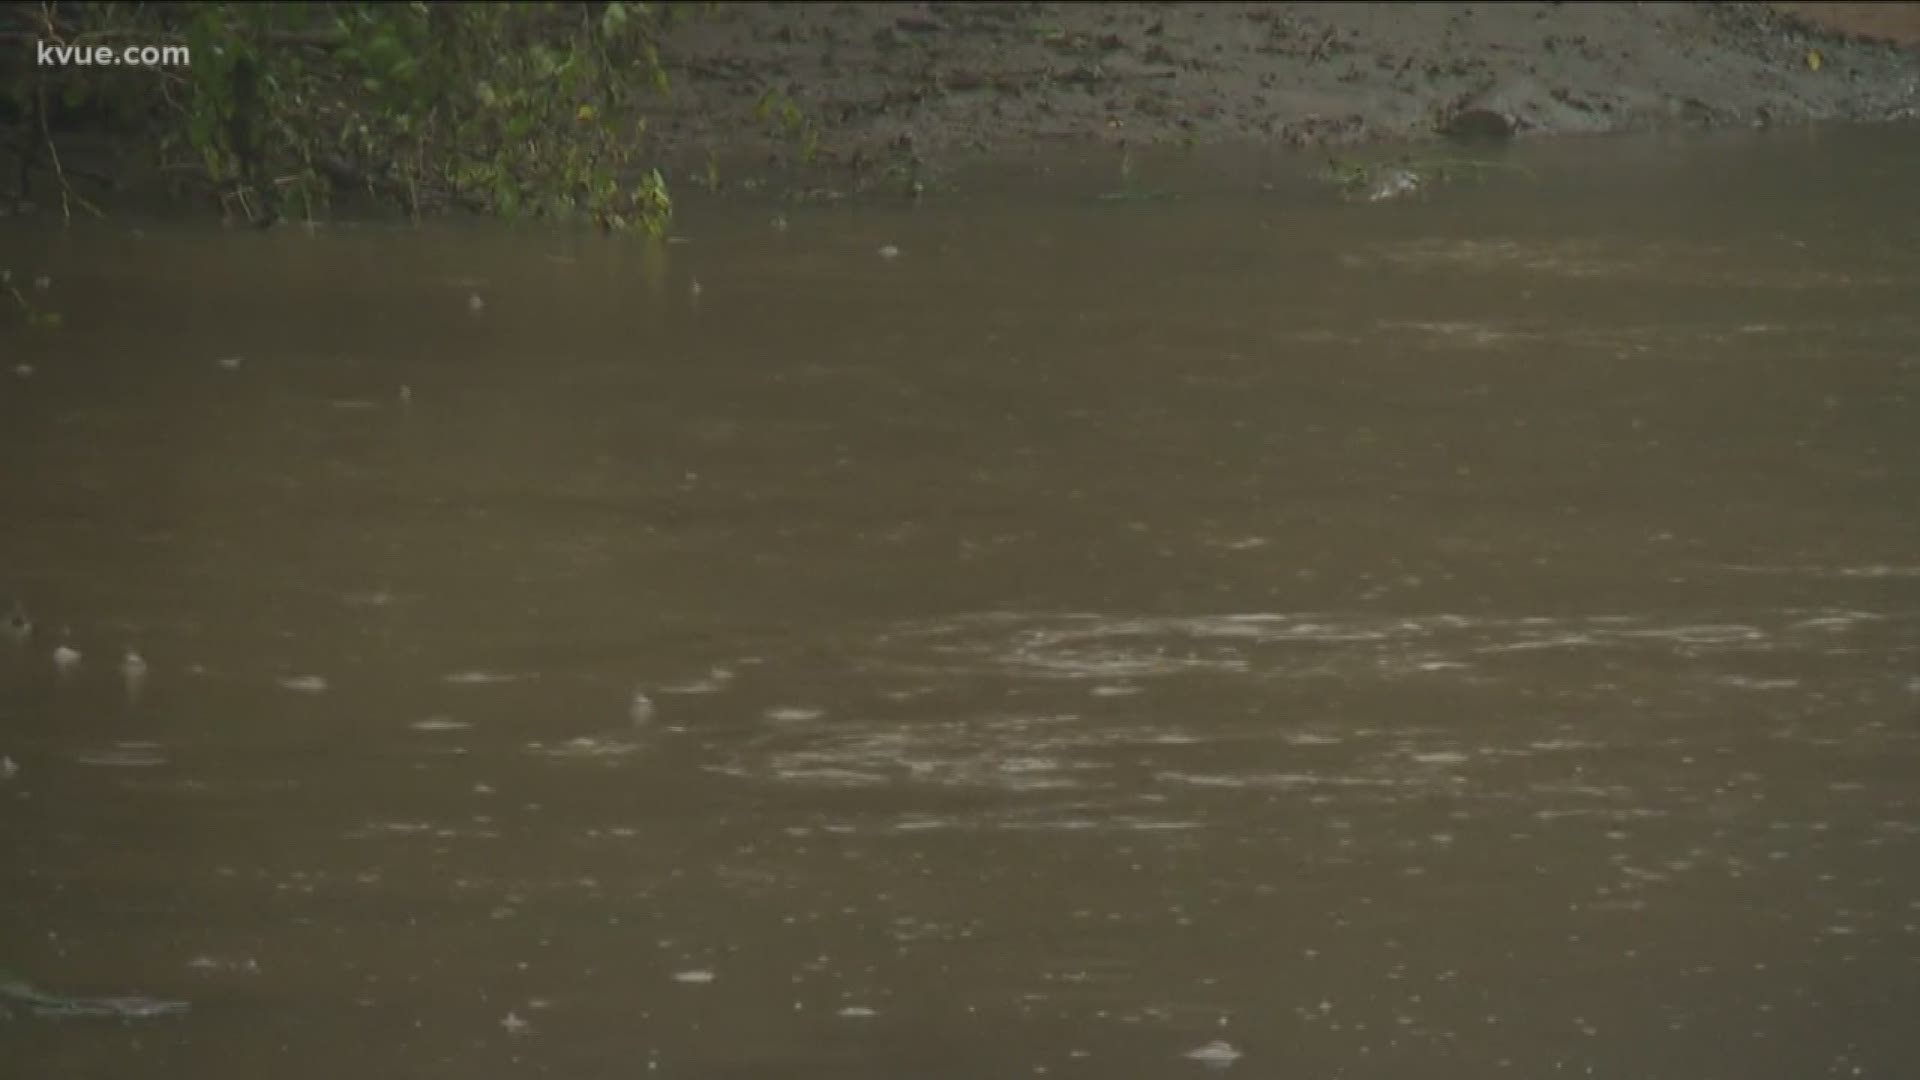 Body recovered in Llano County after flooding